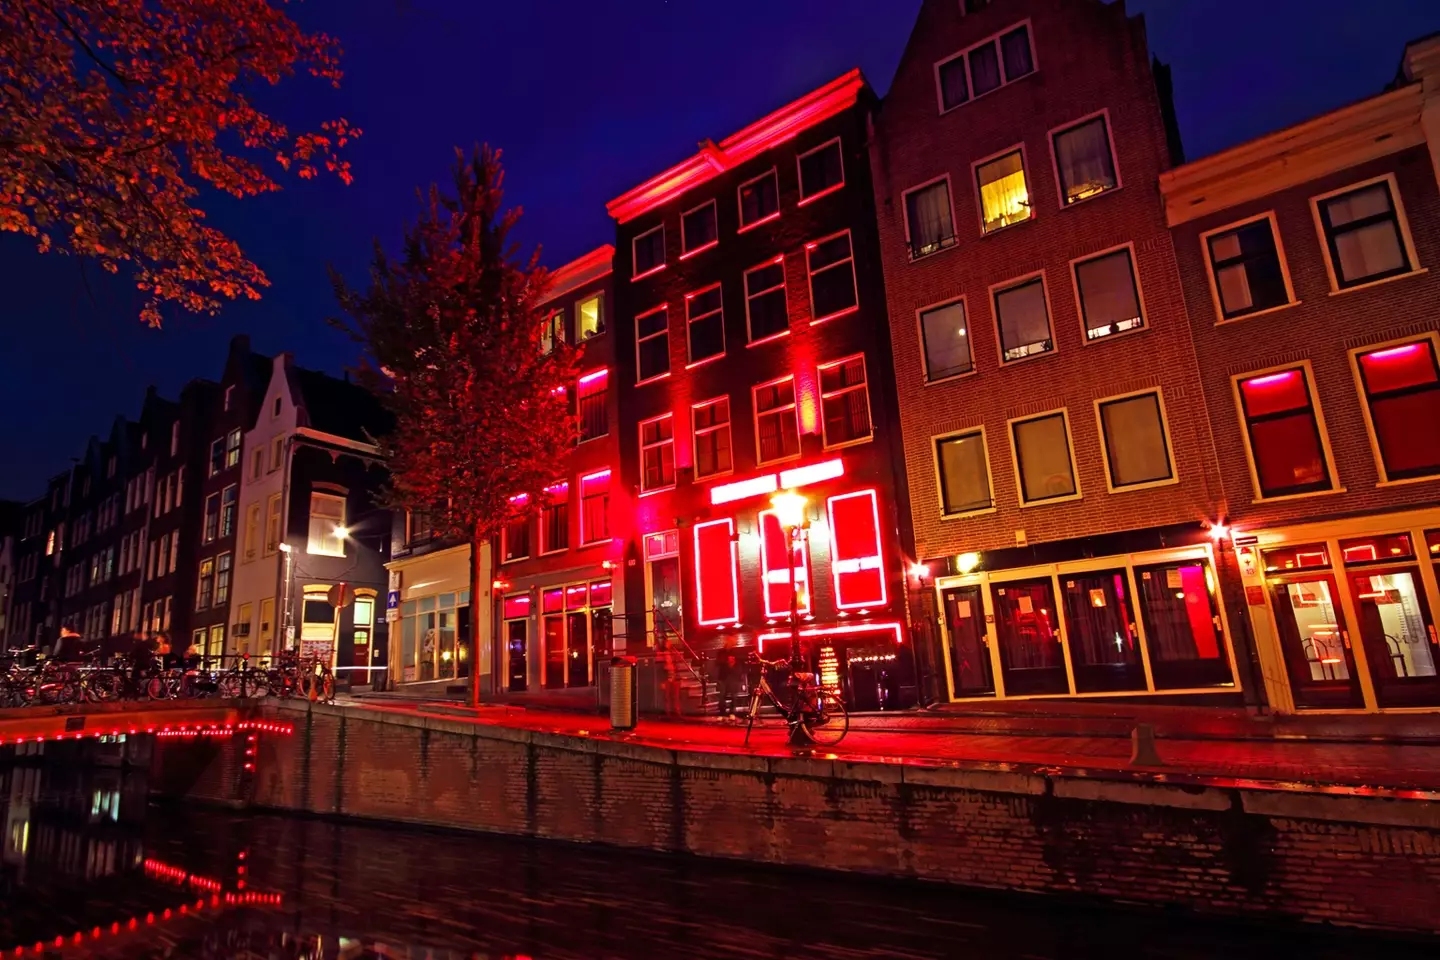 Amsterdam's council is set to vote on a series of laws that could impact it's red light district.